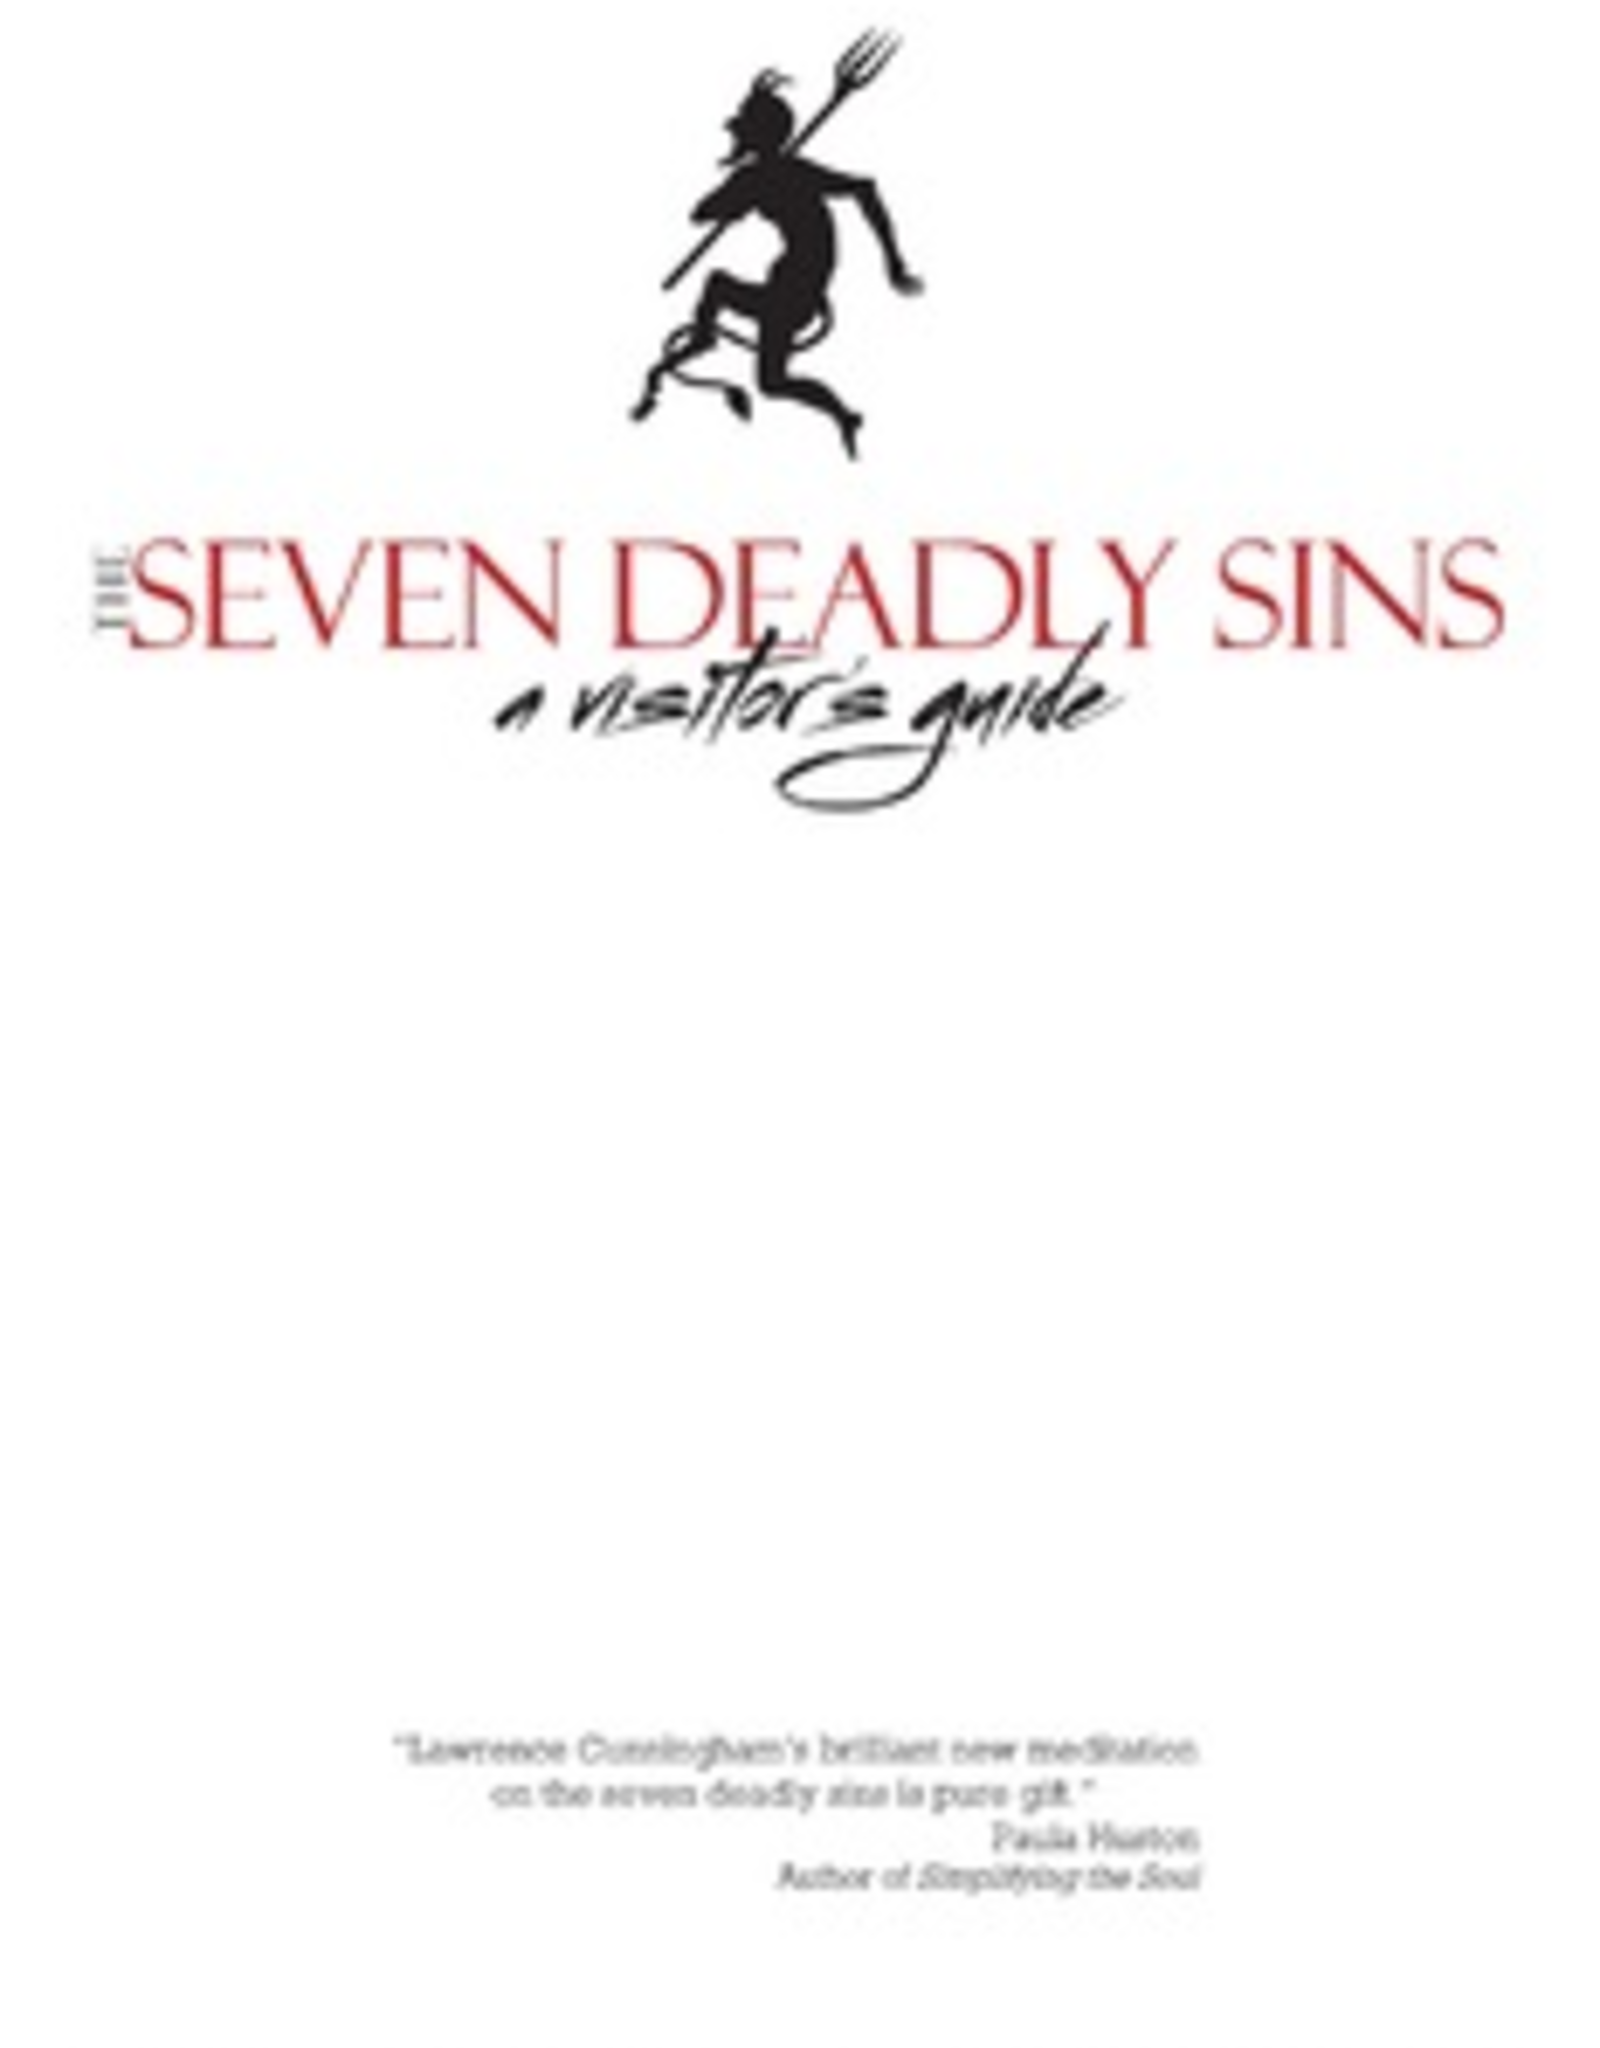 Ave Maria Press The Seven Deadly Sins:  A Visitor's Guide, by Lawrence S. Cunningham (paperback)